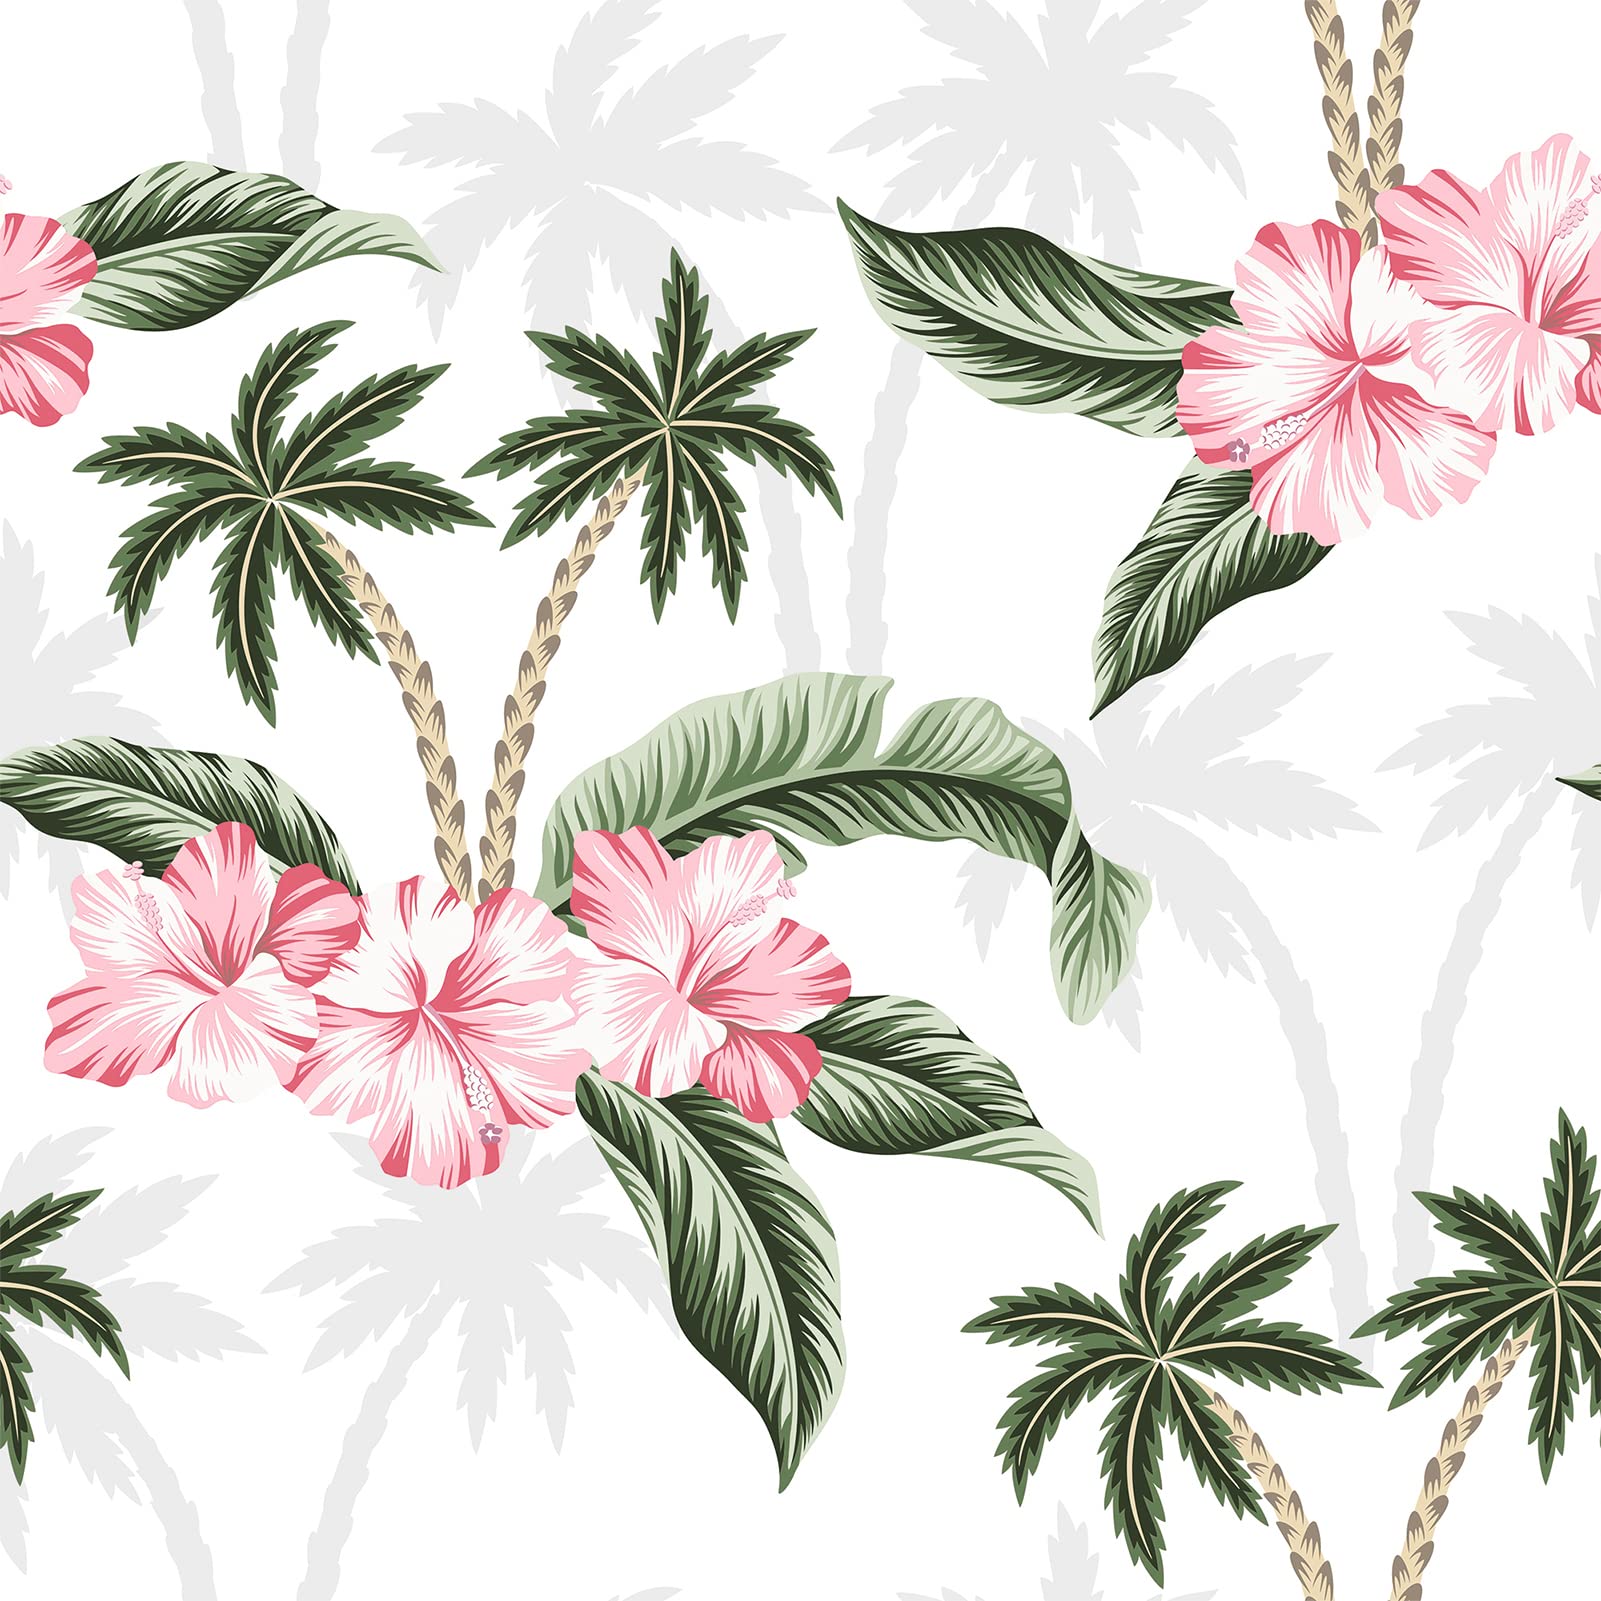 Yullpaper Tropical Floral Wallpaper Pink Hibiscus Flower Wallpaper Peel and Stick Floral Contact Paper for Cabinets Green Leaf Palm Removable Botanical Wallpaper for Bathroom Wall Paper 17.5”x80”